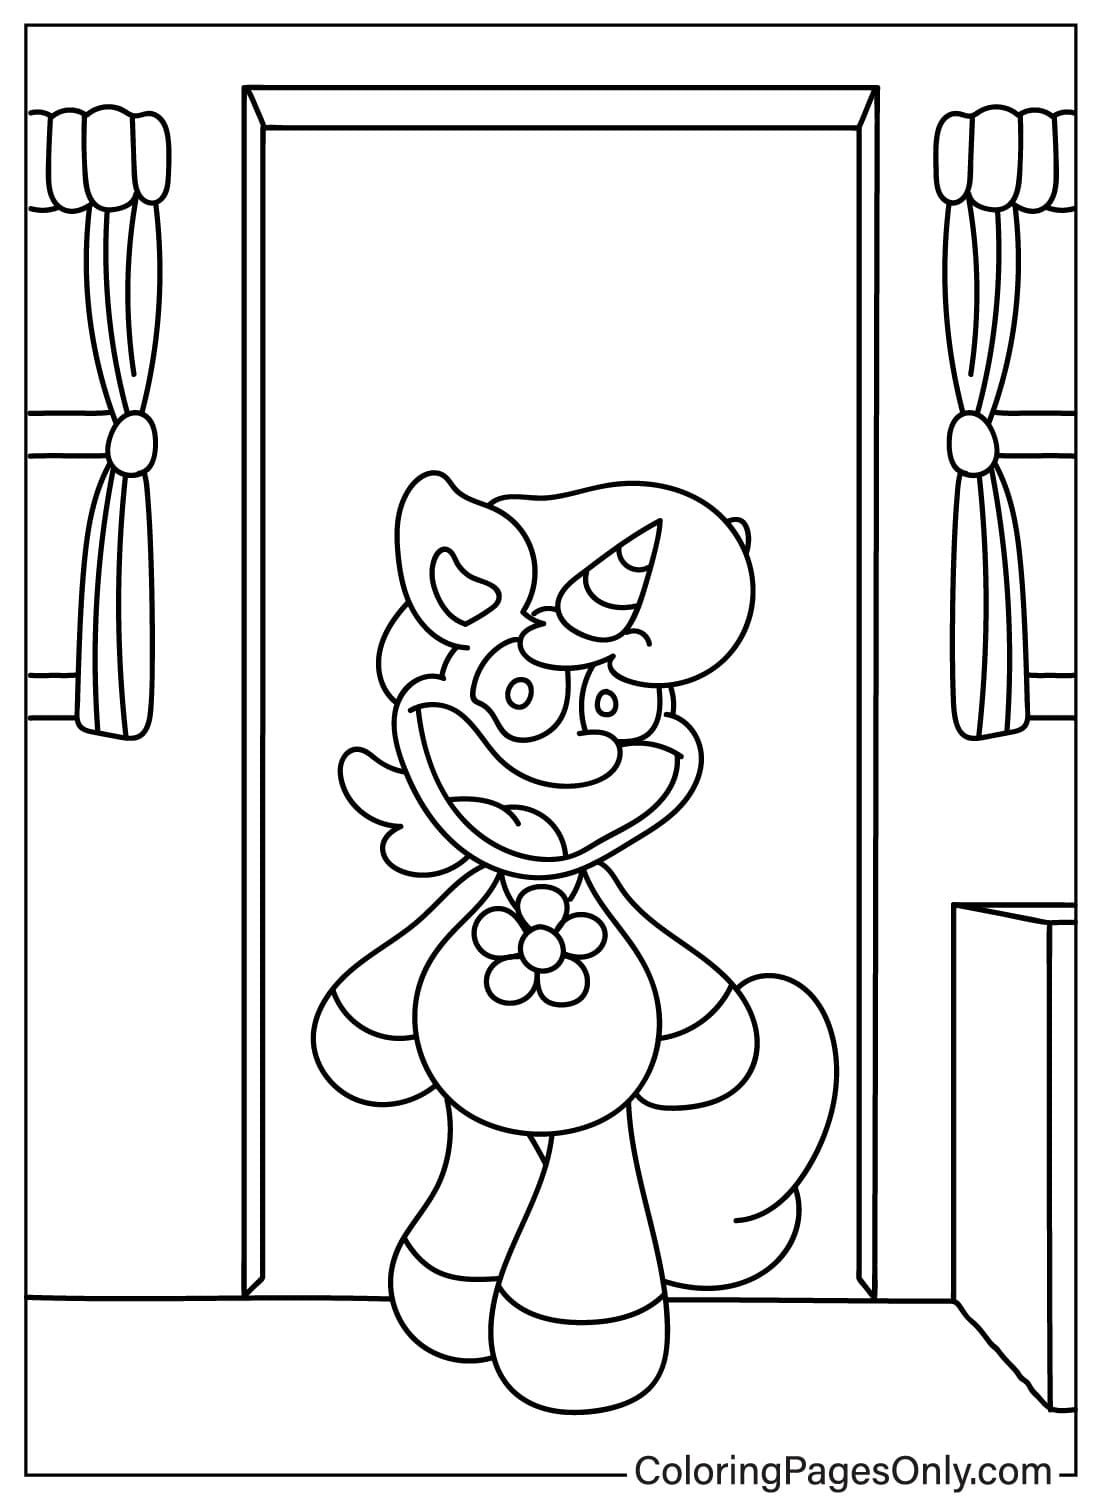 CraftyCorn Going in the House Coloring Sheet from CraftyCorn